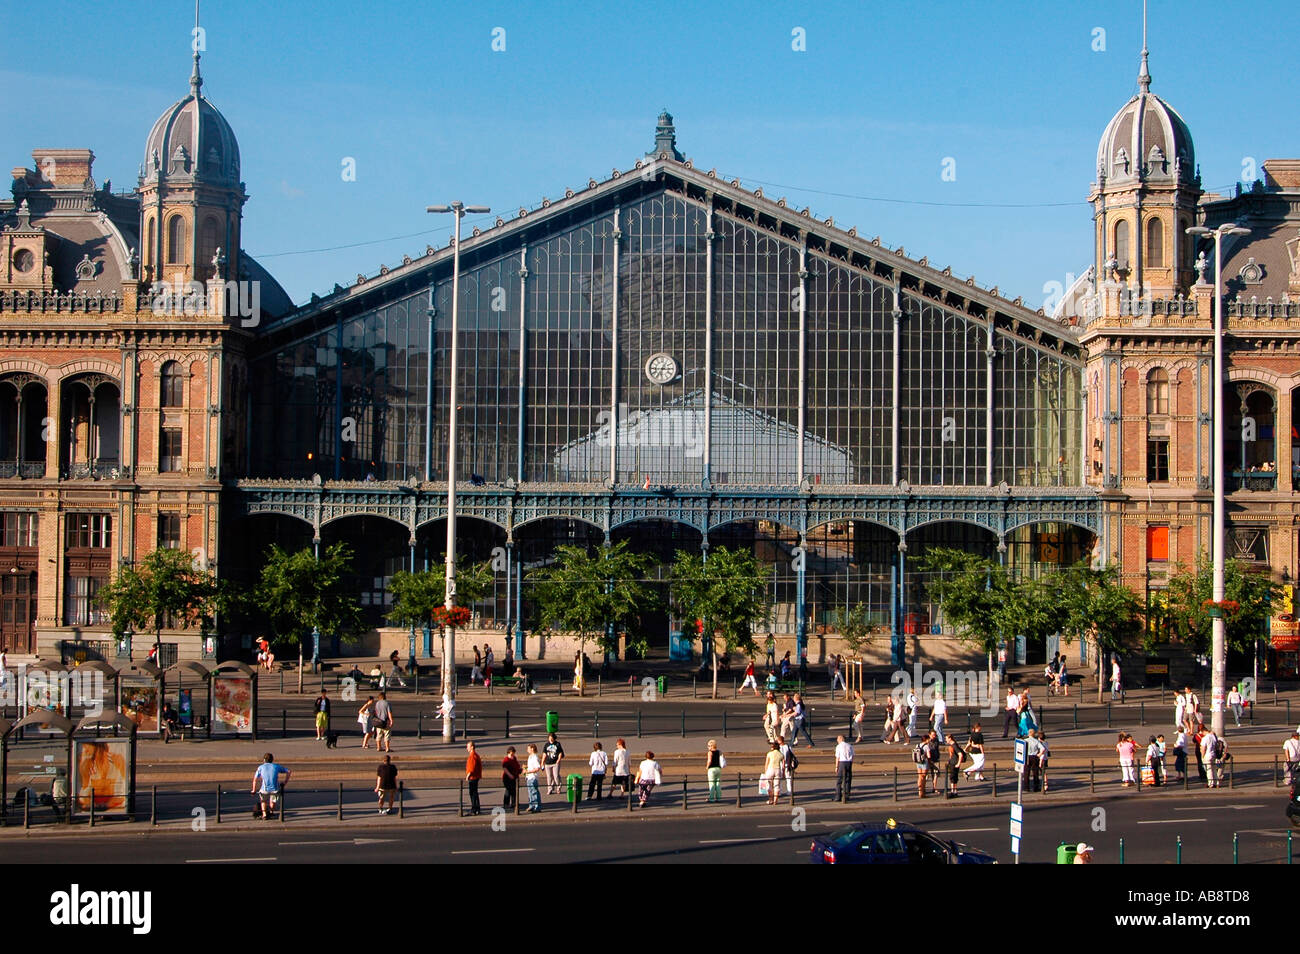 Exterior view of Budapest-Nyugati palyaudvar Western railway station,  planned by August de Serres opened 1877 in Budapest Hungary Stock Photo -  Alamy